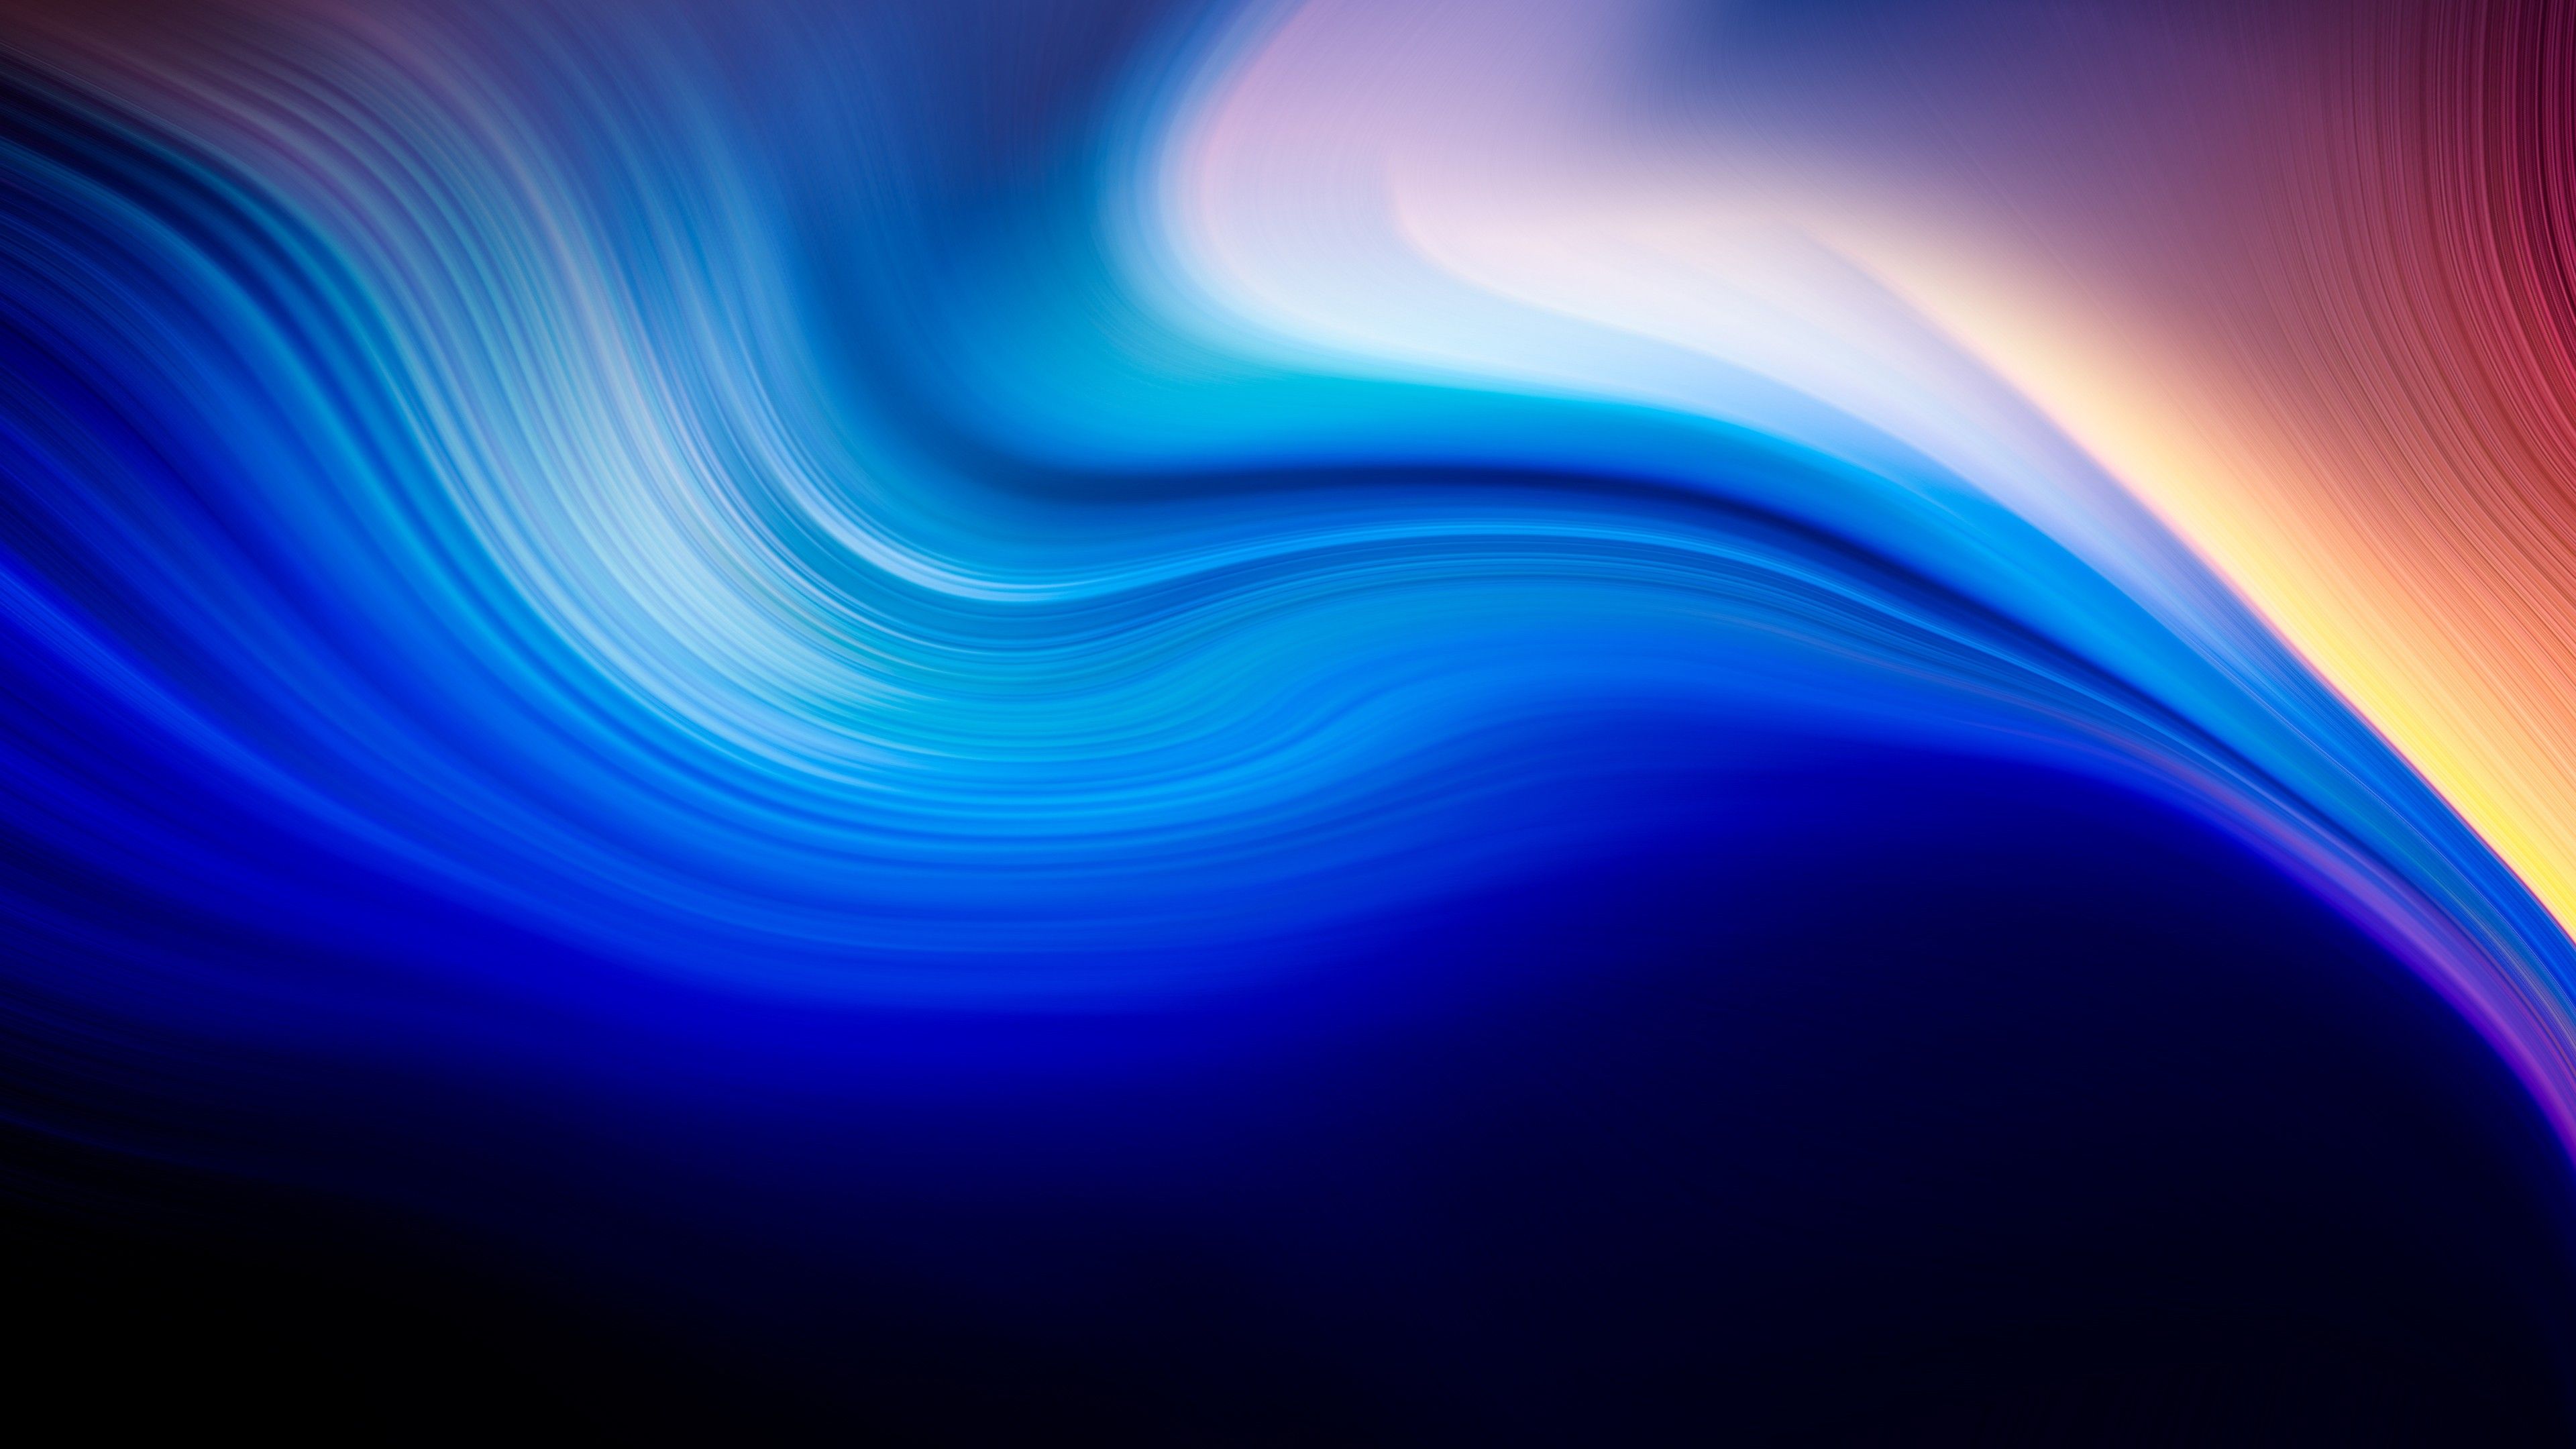 Blue And Brown Abstract Wave 4K 1 HD Wallpaper